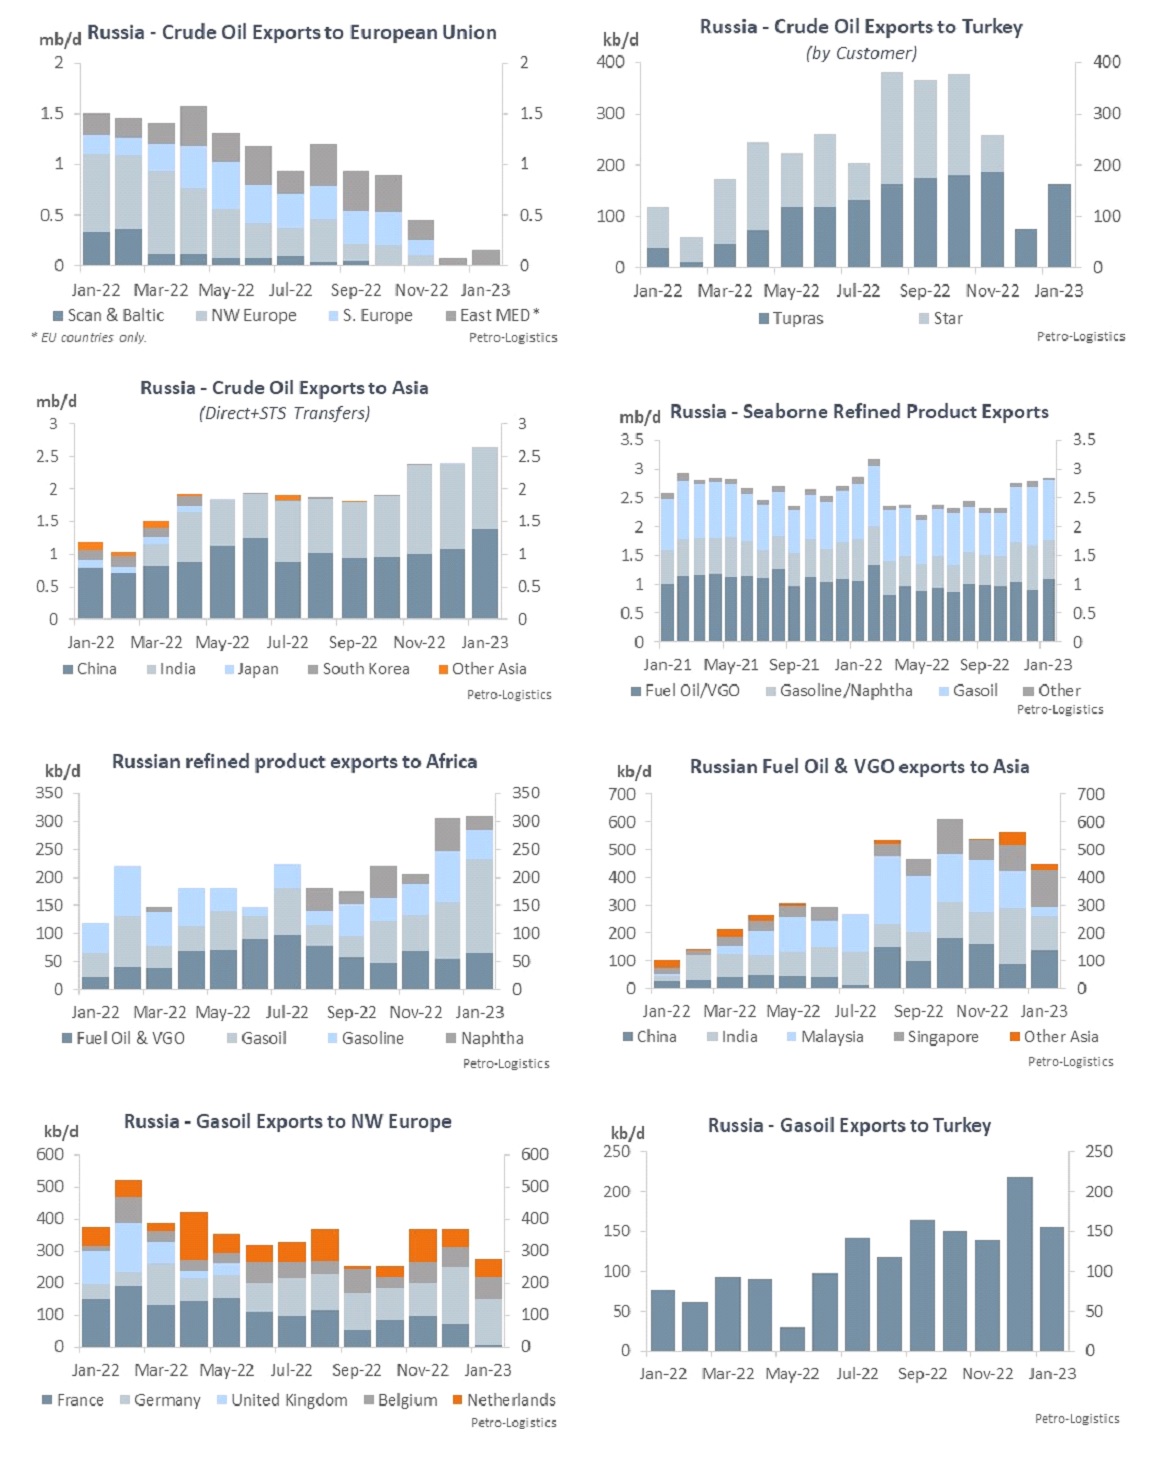 Array of graphs showing Russian exports of crude oil and refined products